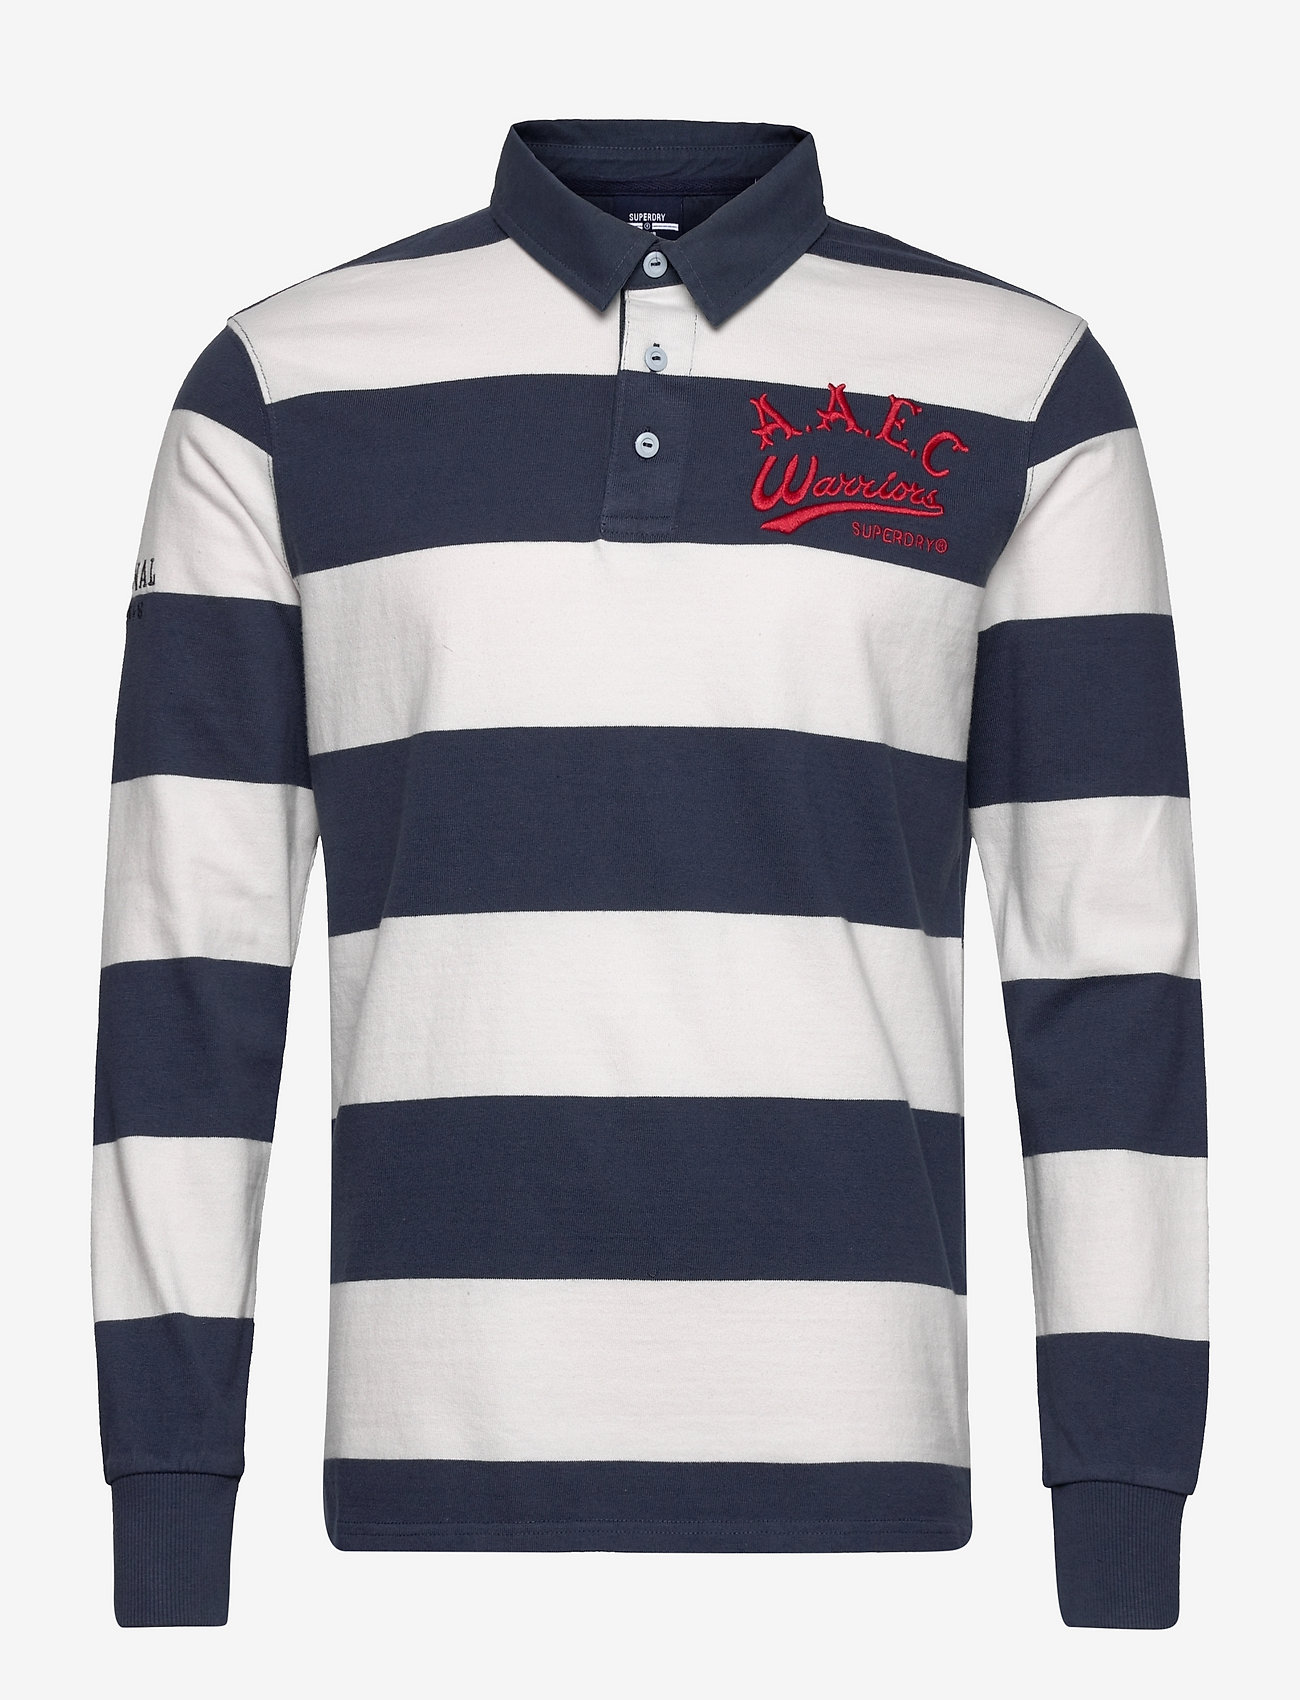 superdry rugby shirt